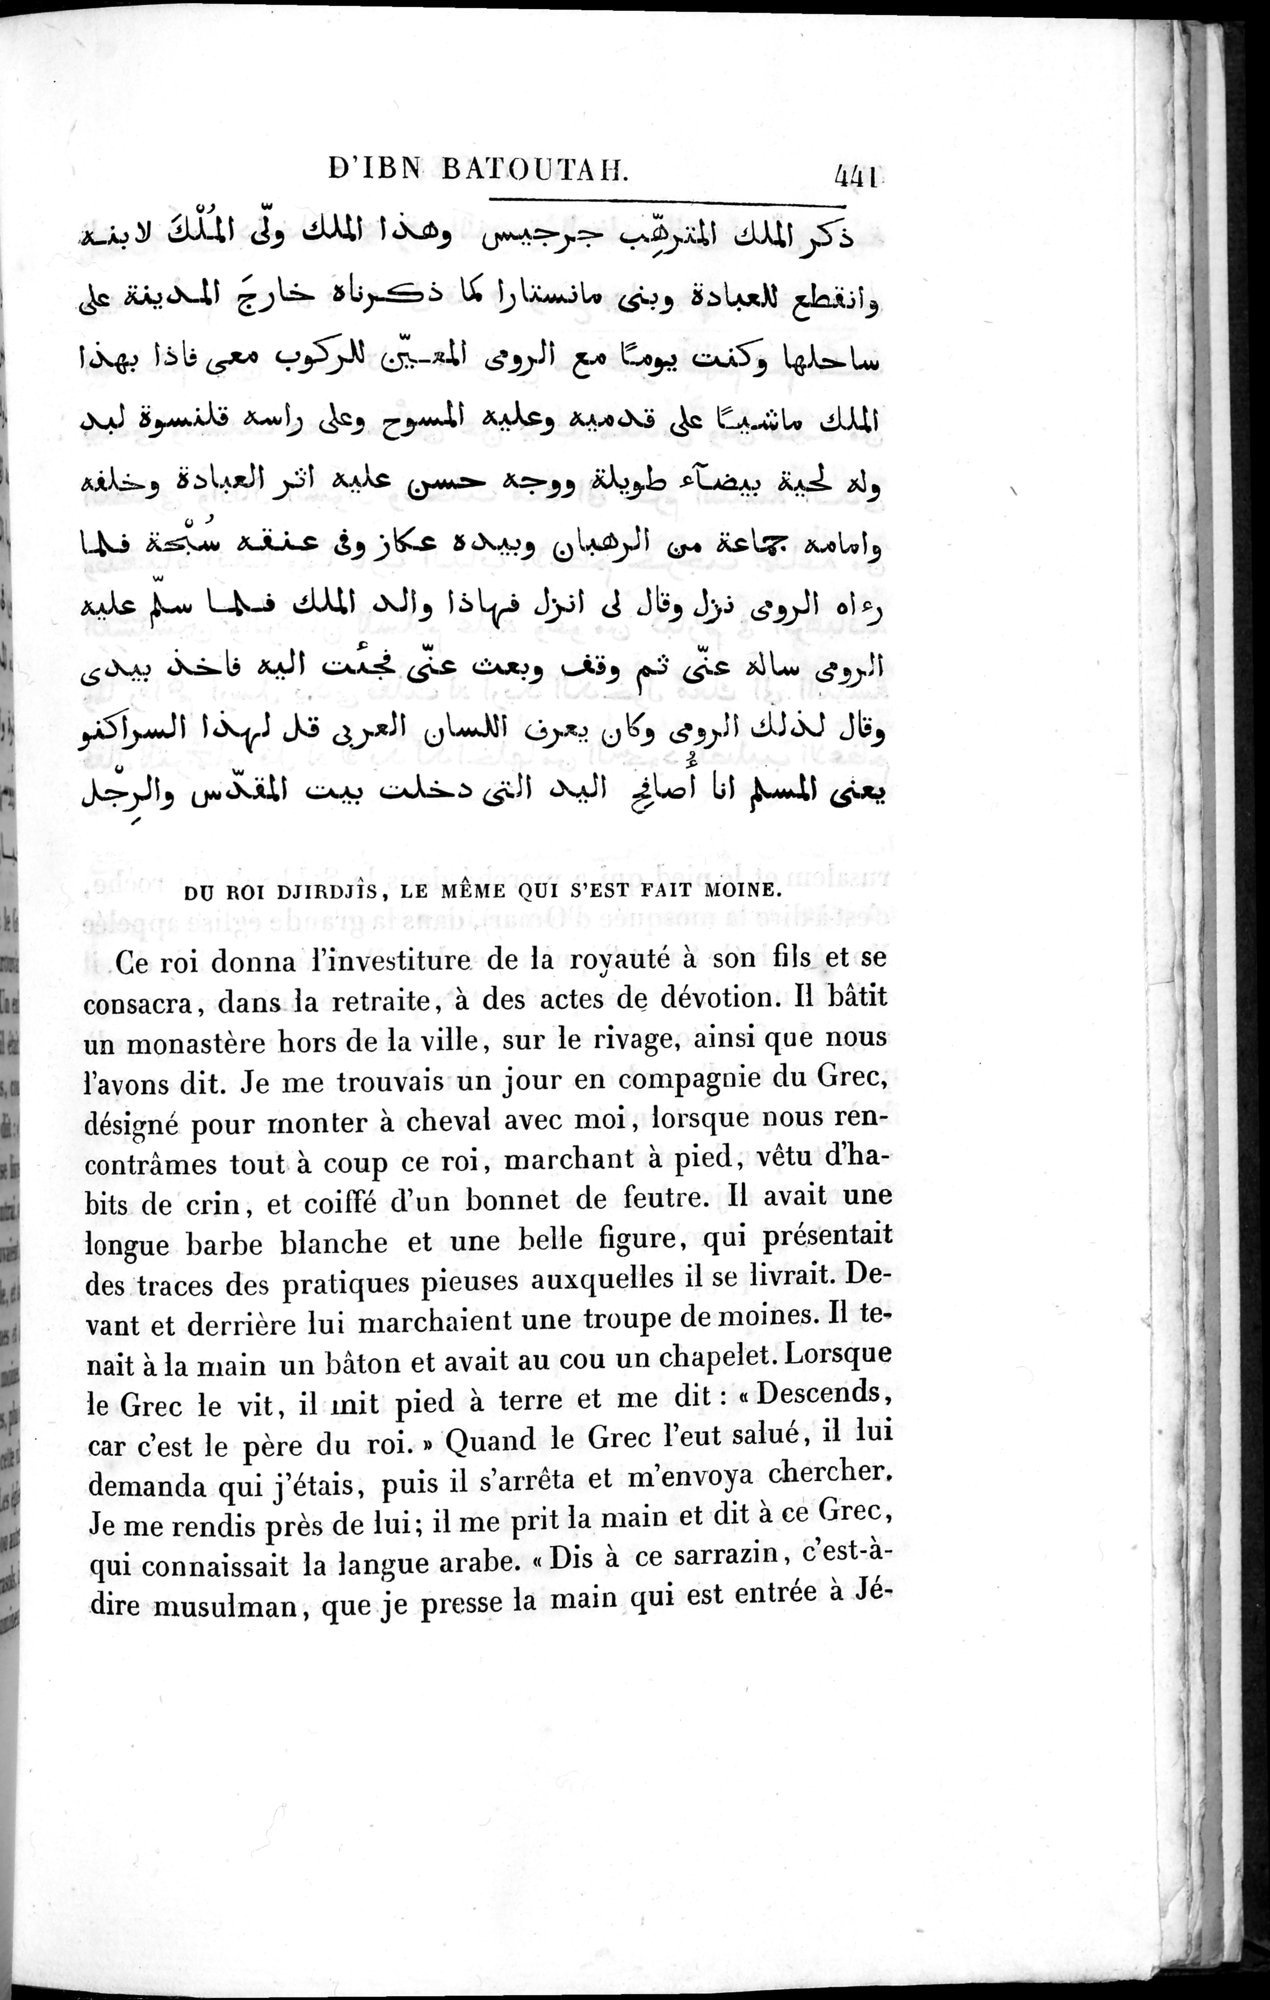 Voyages d'Ibn Batoutah : vol.2 / Page 469 (Grayscale High Resolution Image)